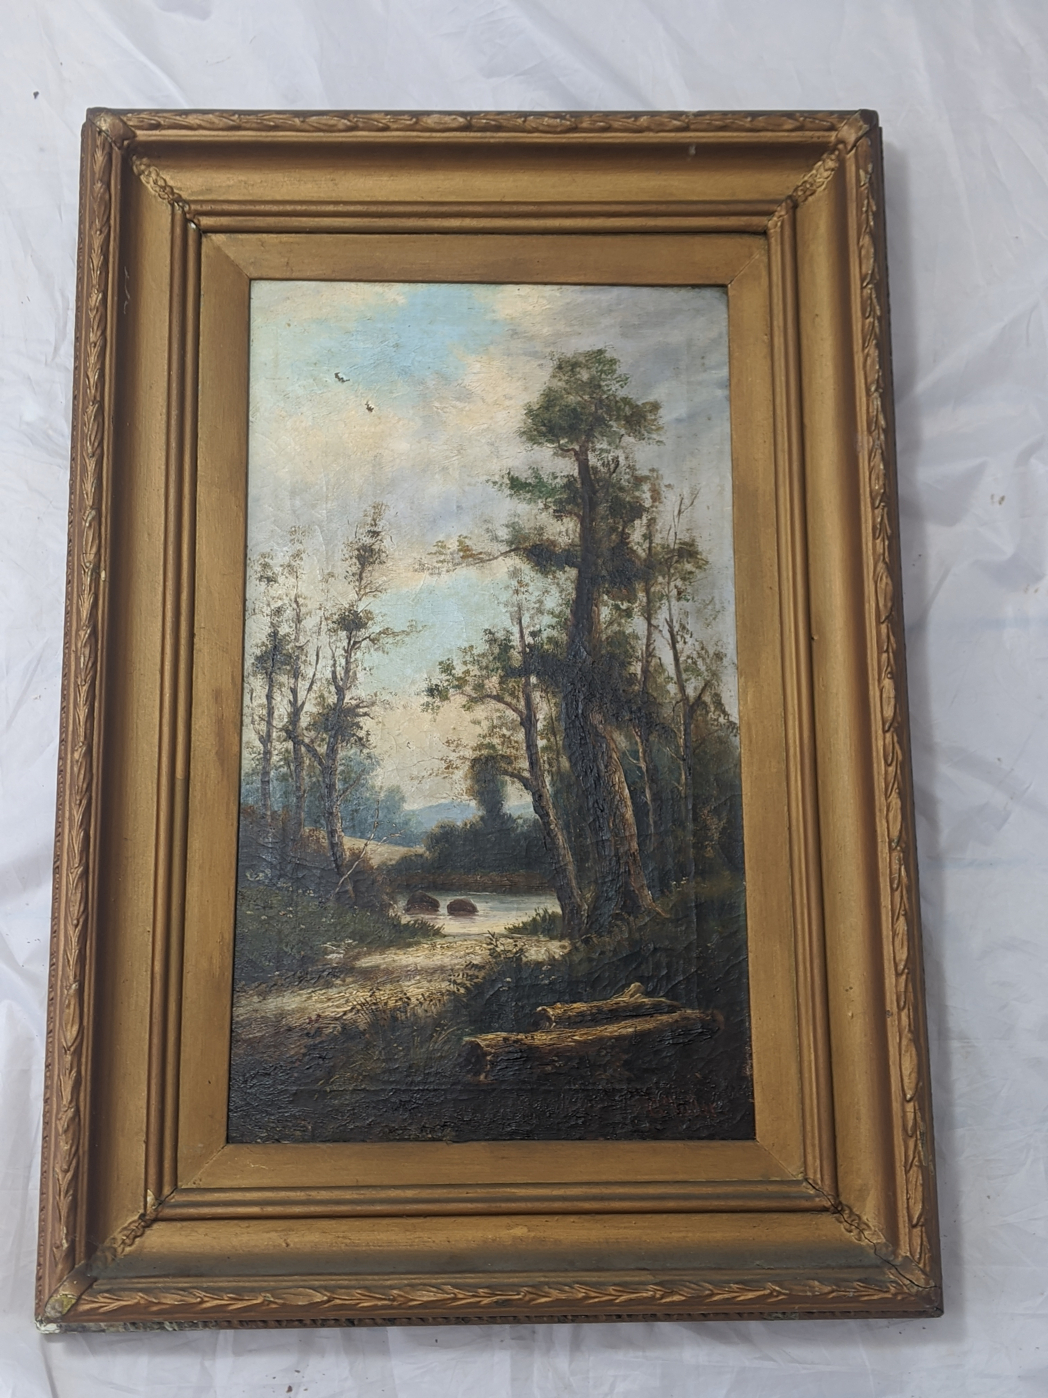 G.Muller (Late19th century Continental), a forestry scene, oil on canvas, signed lower right, H.61cm - Image 3 of 3